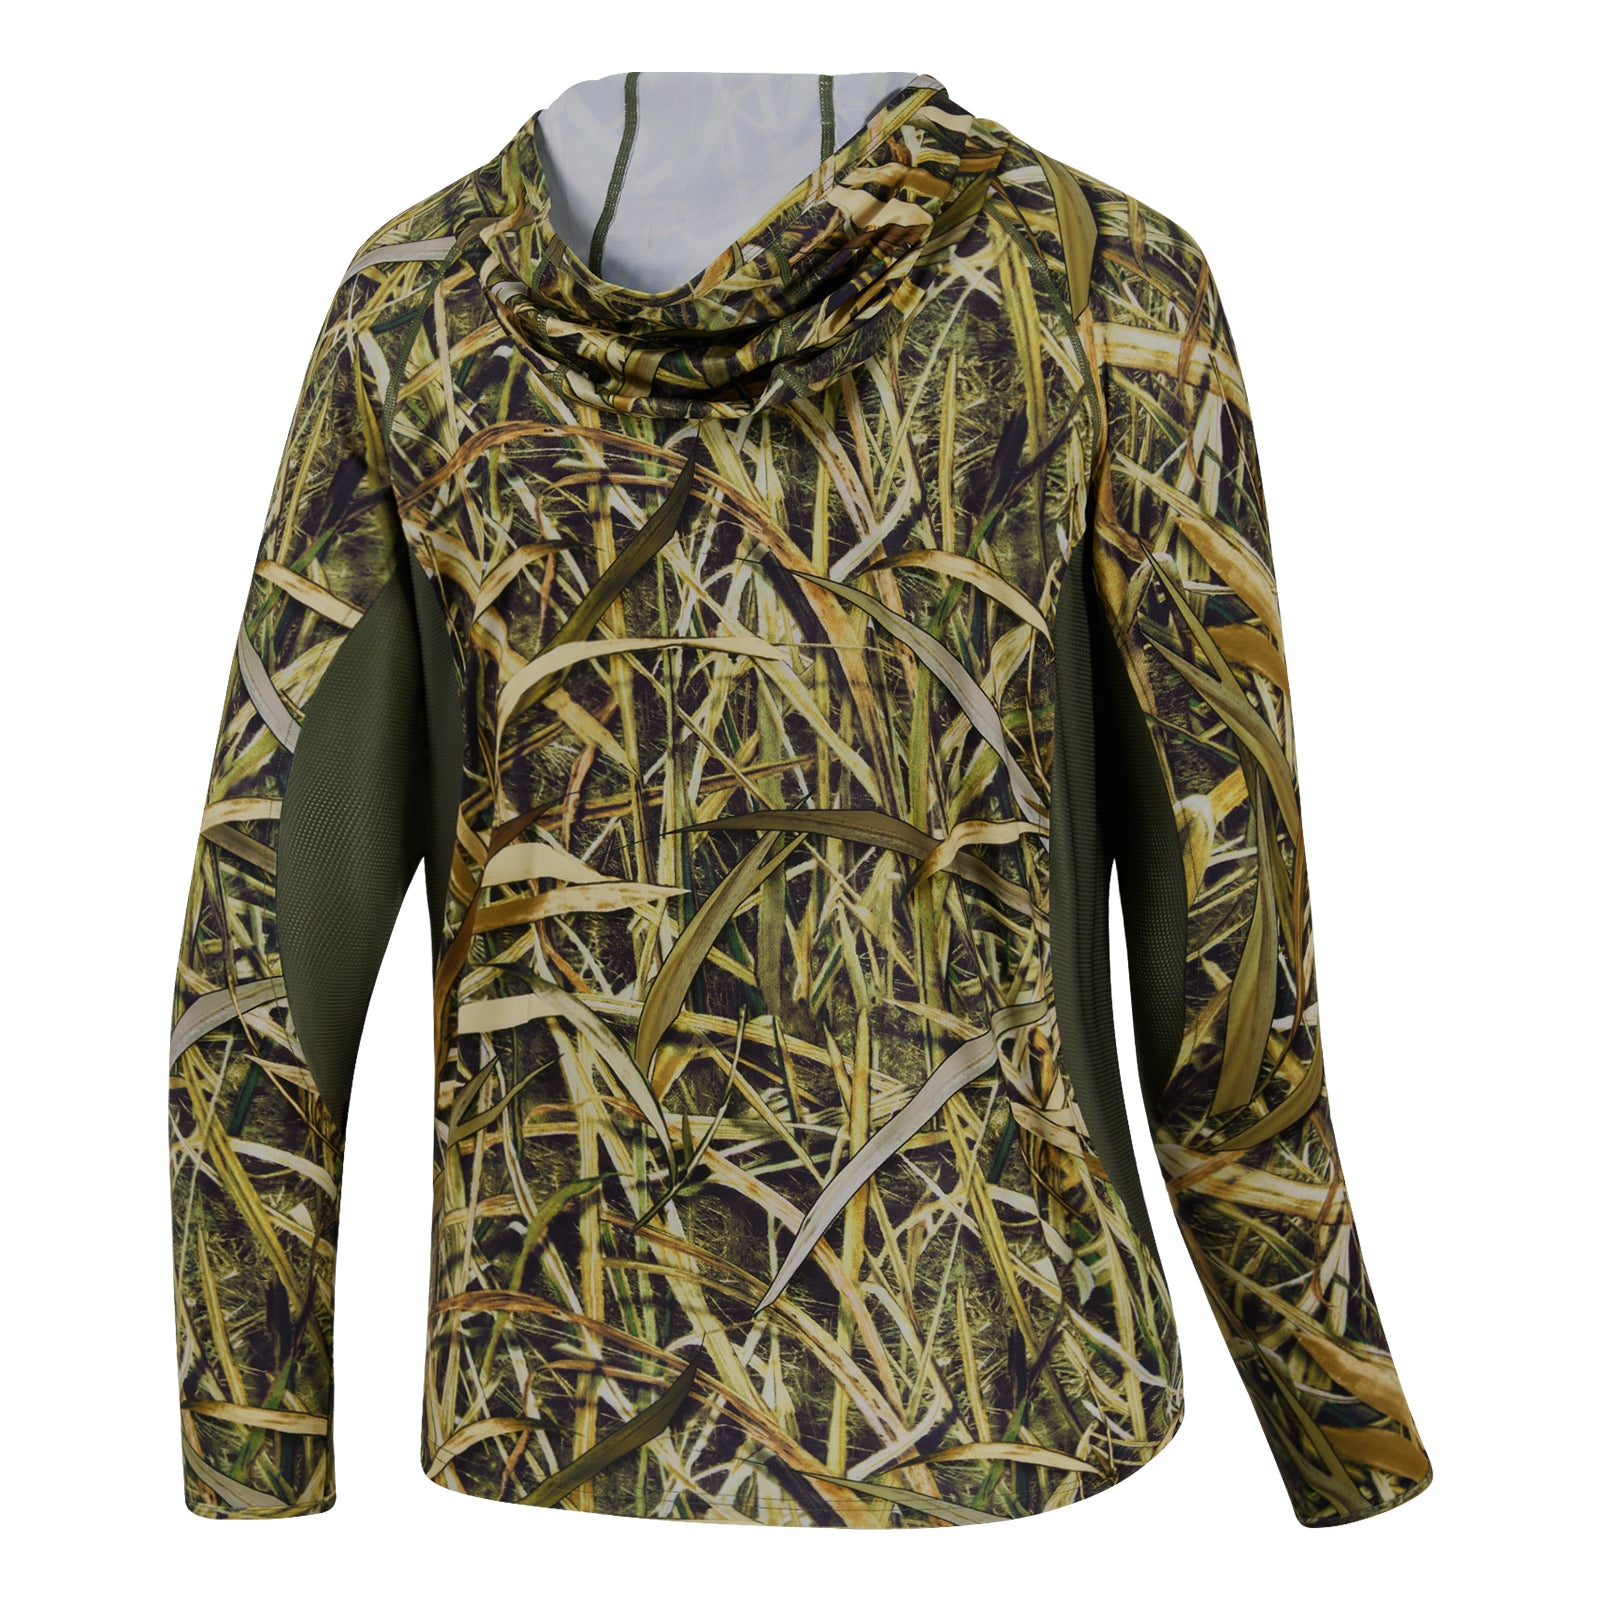 Bassdash Men's Long Sleeve Shirt Hunting Camo Performance For Fishing  Camouflaging Sweatershirt Mossy Wood Reeds Forest SD1